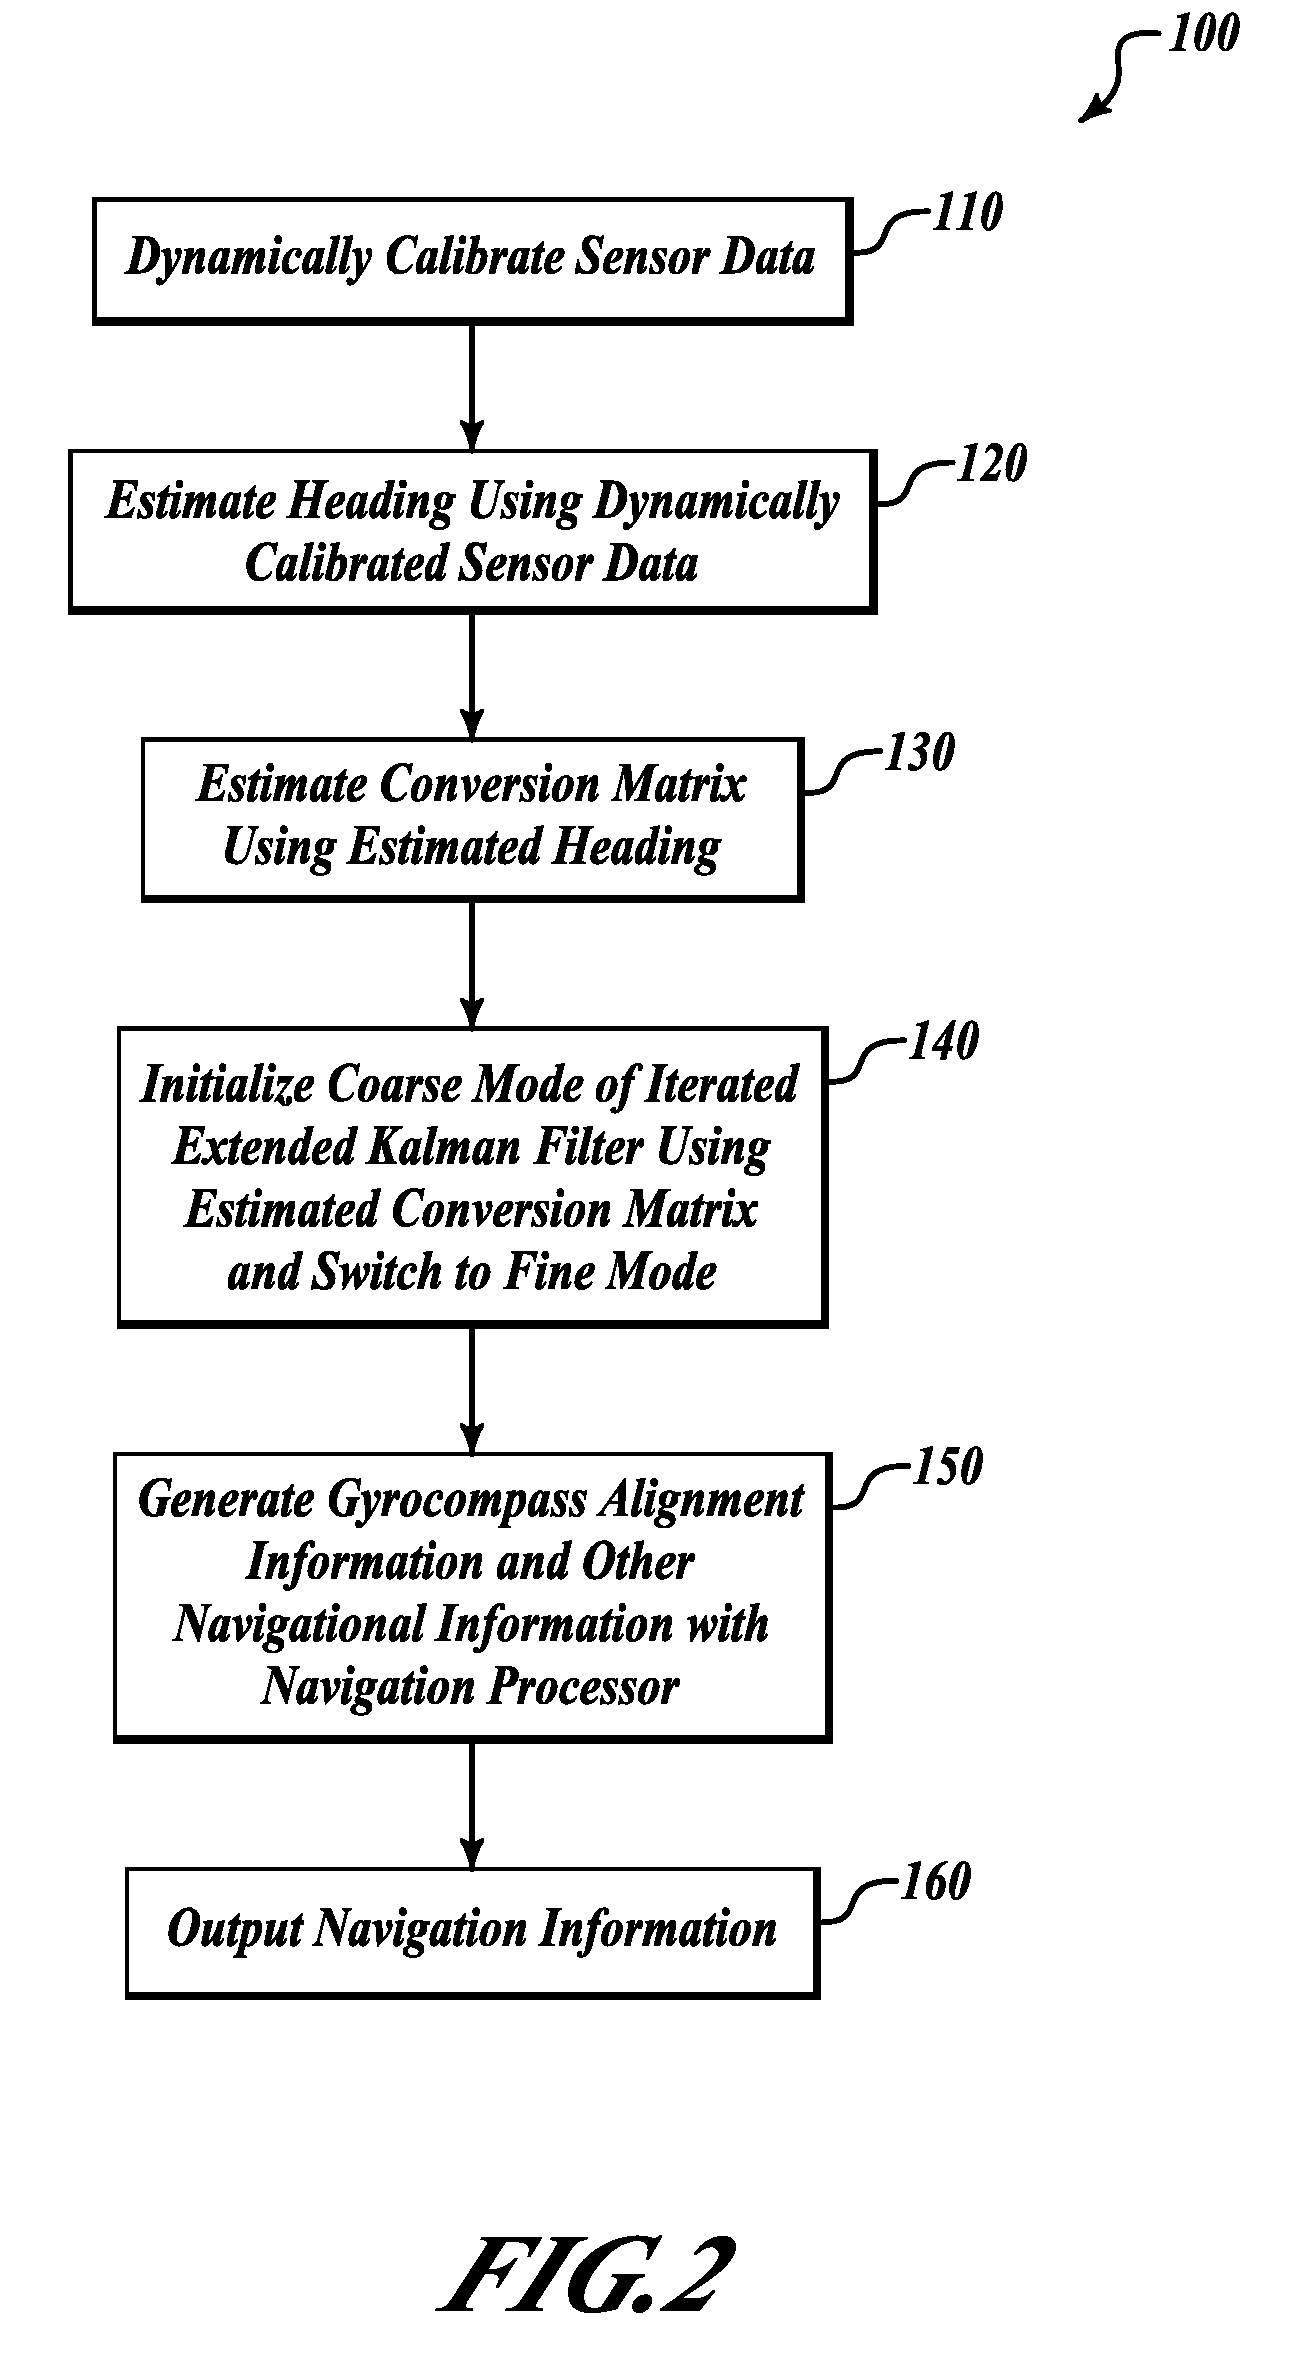 Systems and methods for gyrocompass alignment using dynamically calibrated sensor data and an iterated extended kalman filter within a navigation system